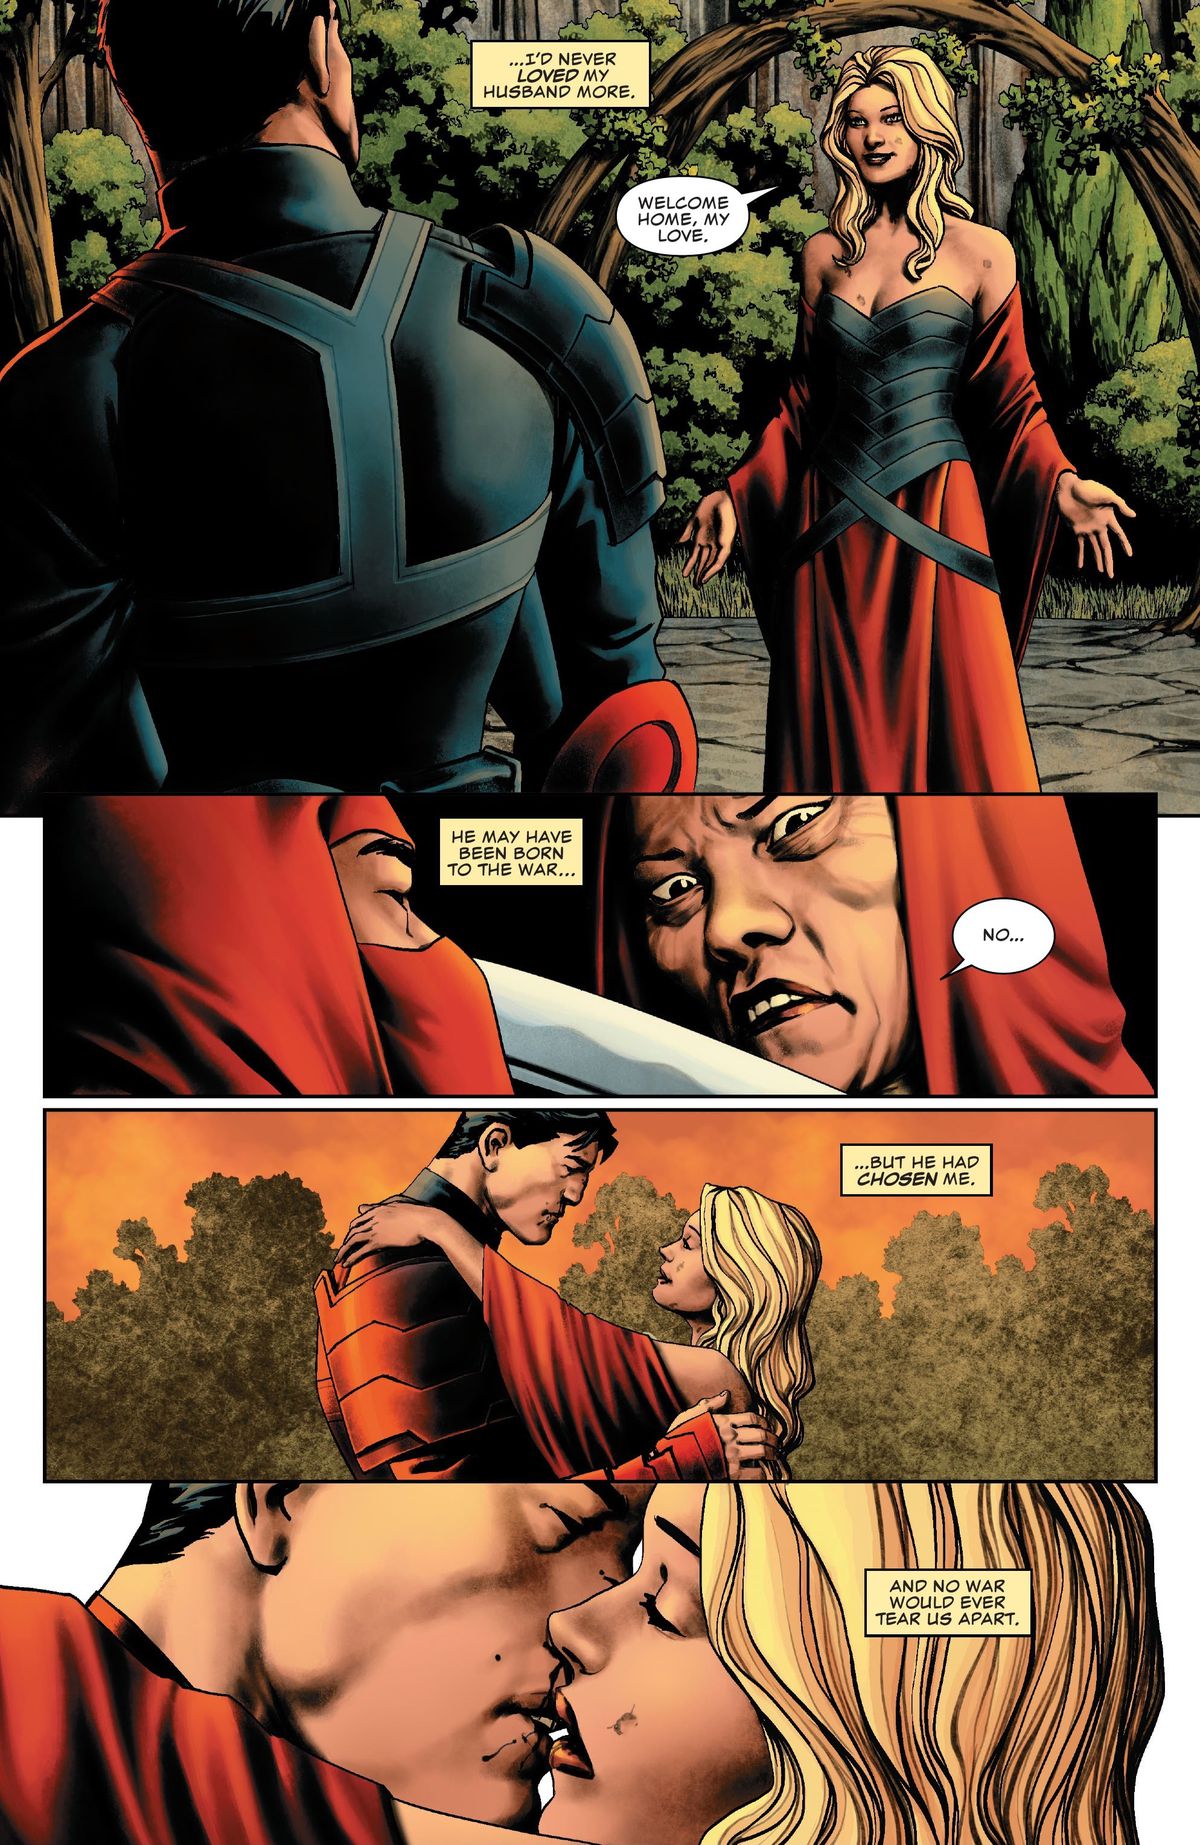 Maria, wearing a villain dress, embraces her husband, musing in narration about how his affinity for murder was made lovable when he showed that he was willing to give it up for her, in Punisher #9 (2023).